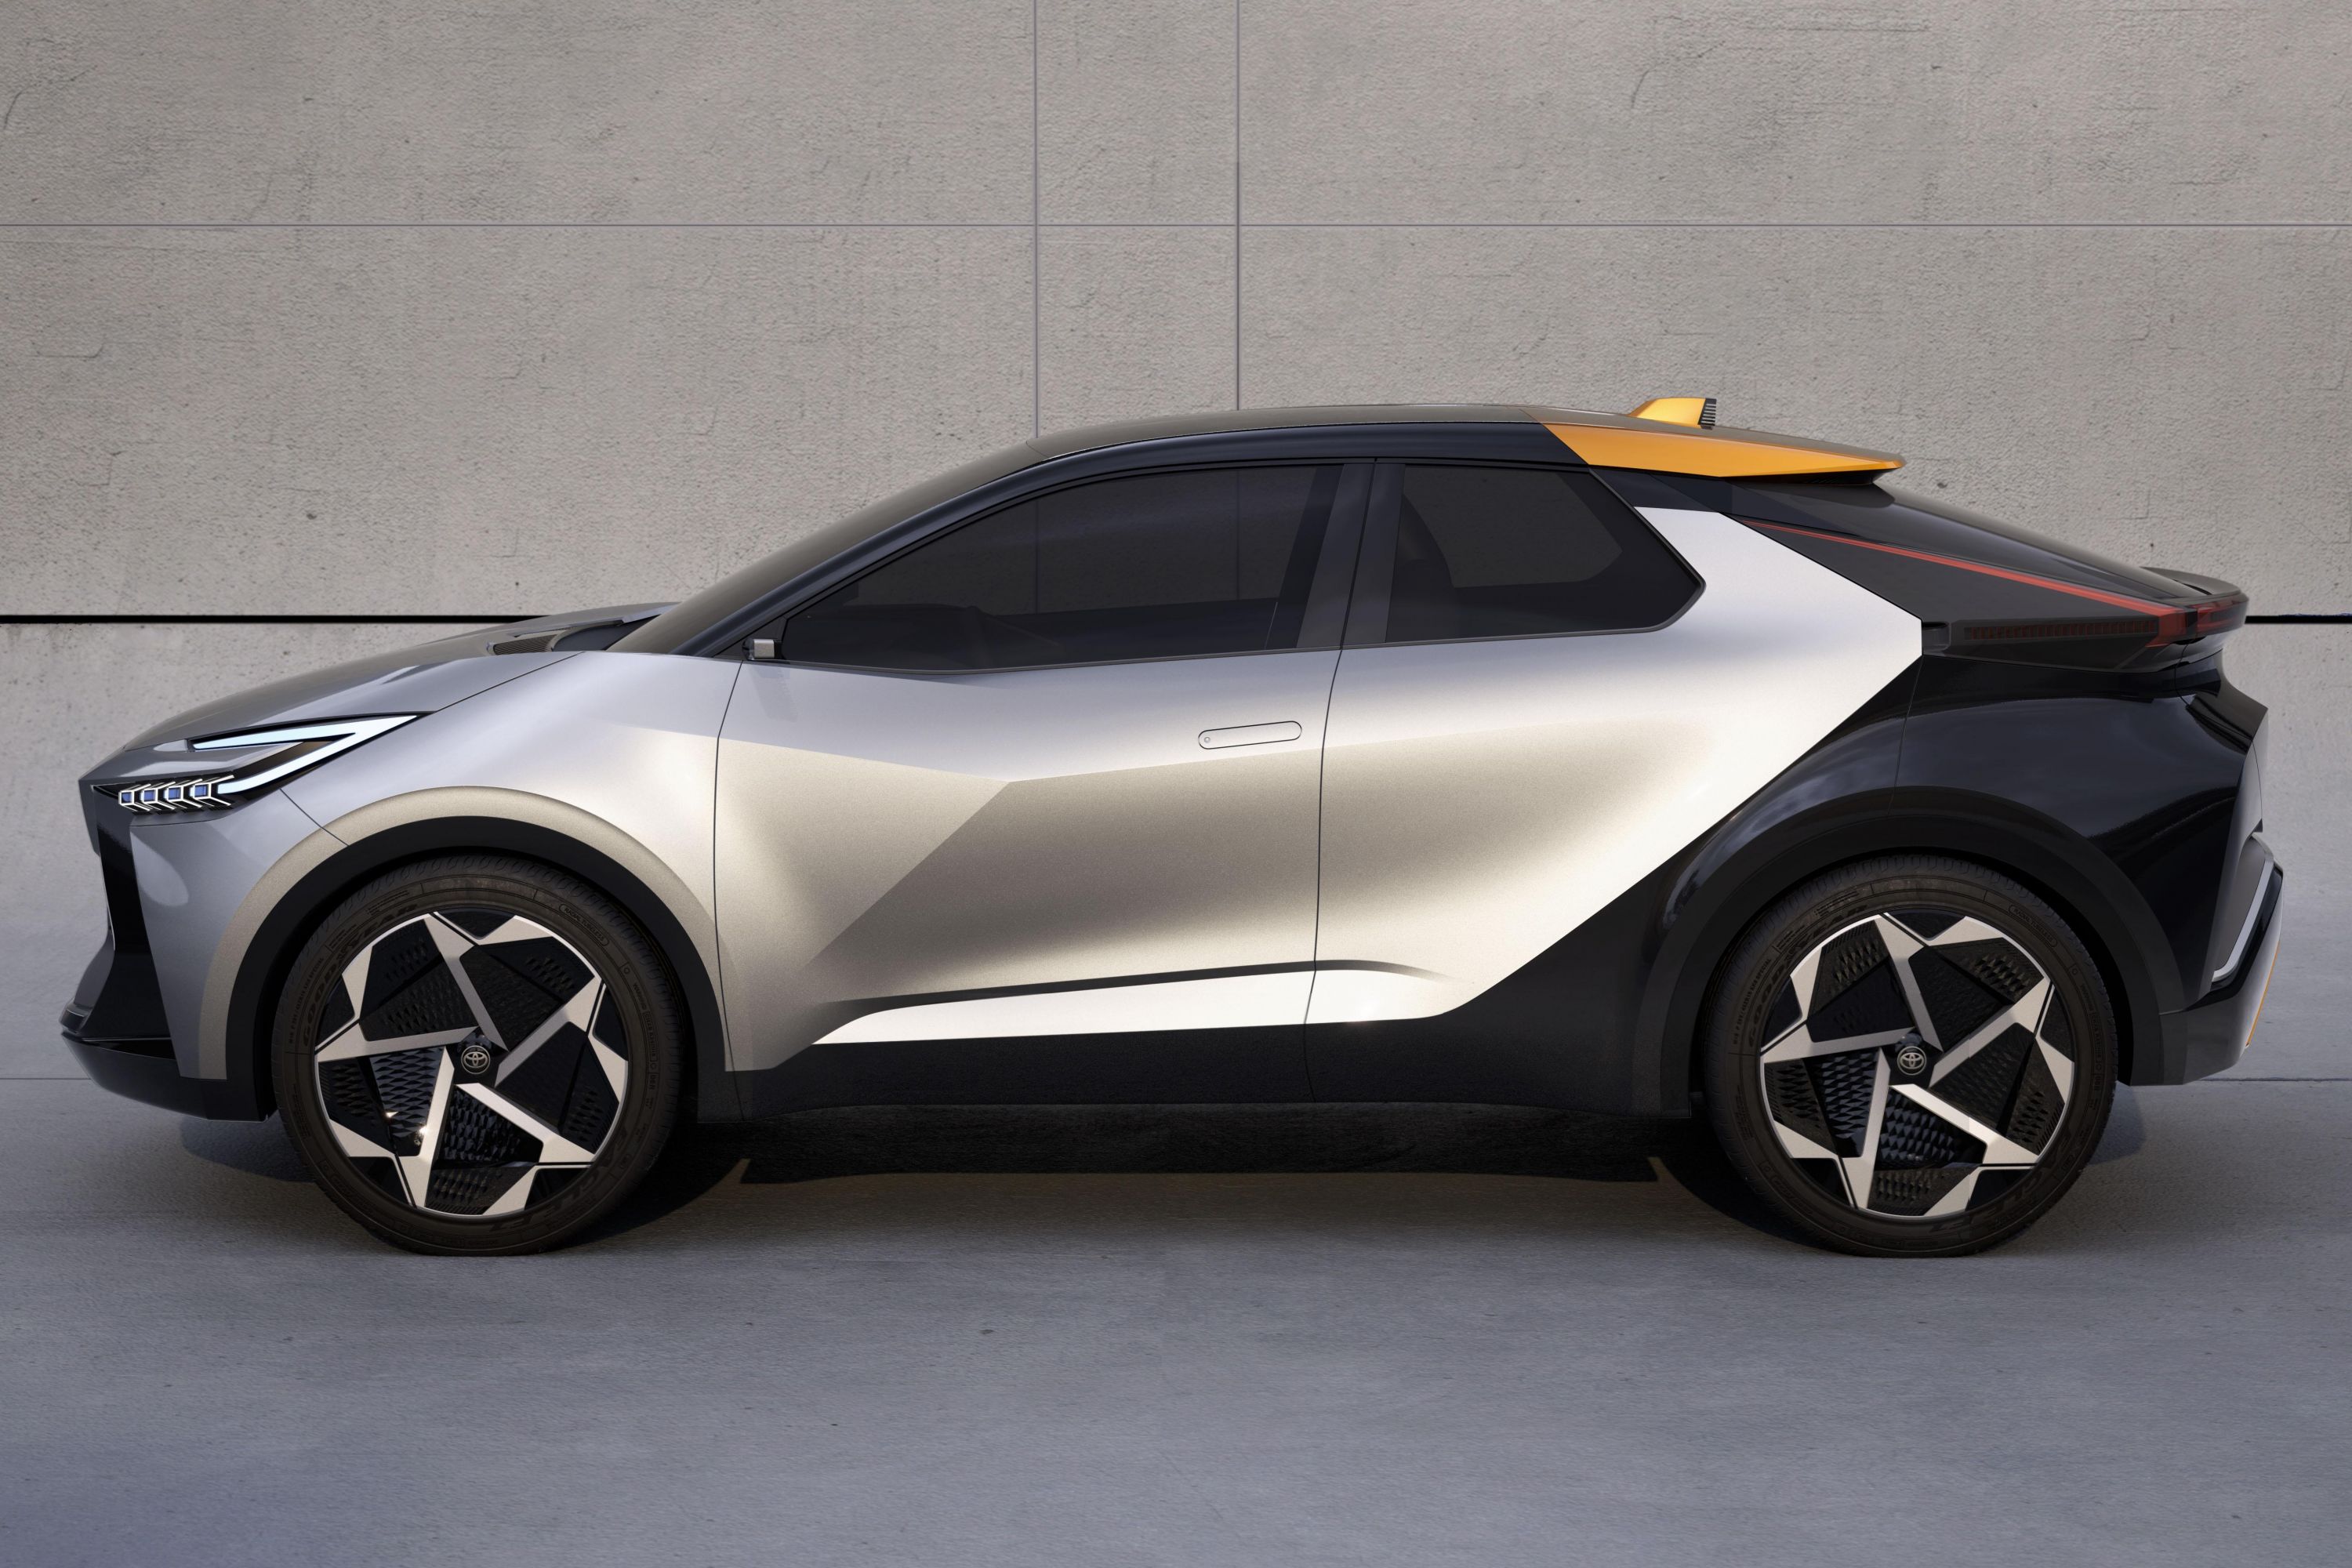 New Toyota Aygo X Prologue Concept Previews Small Rugged Crossover For 2022